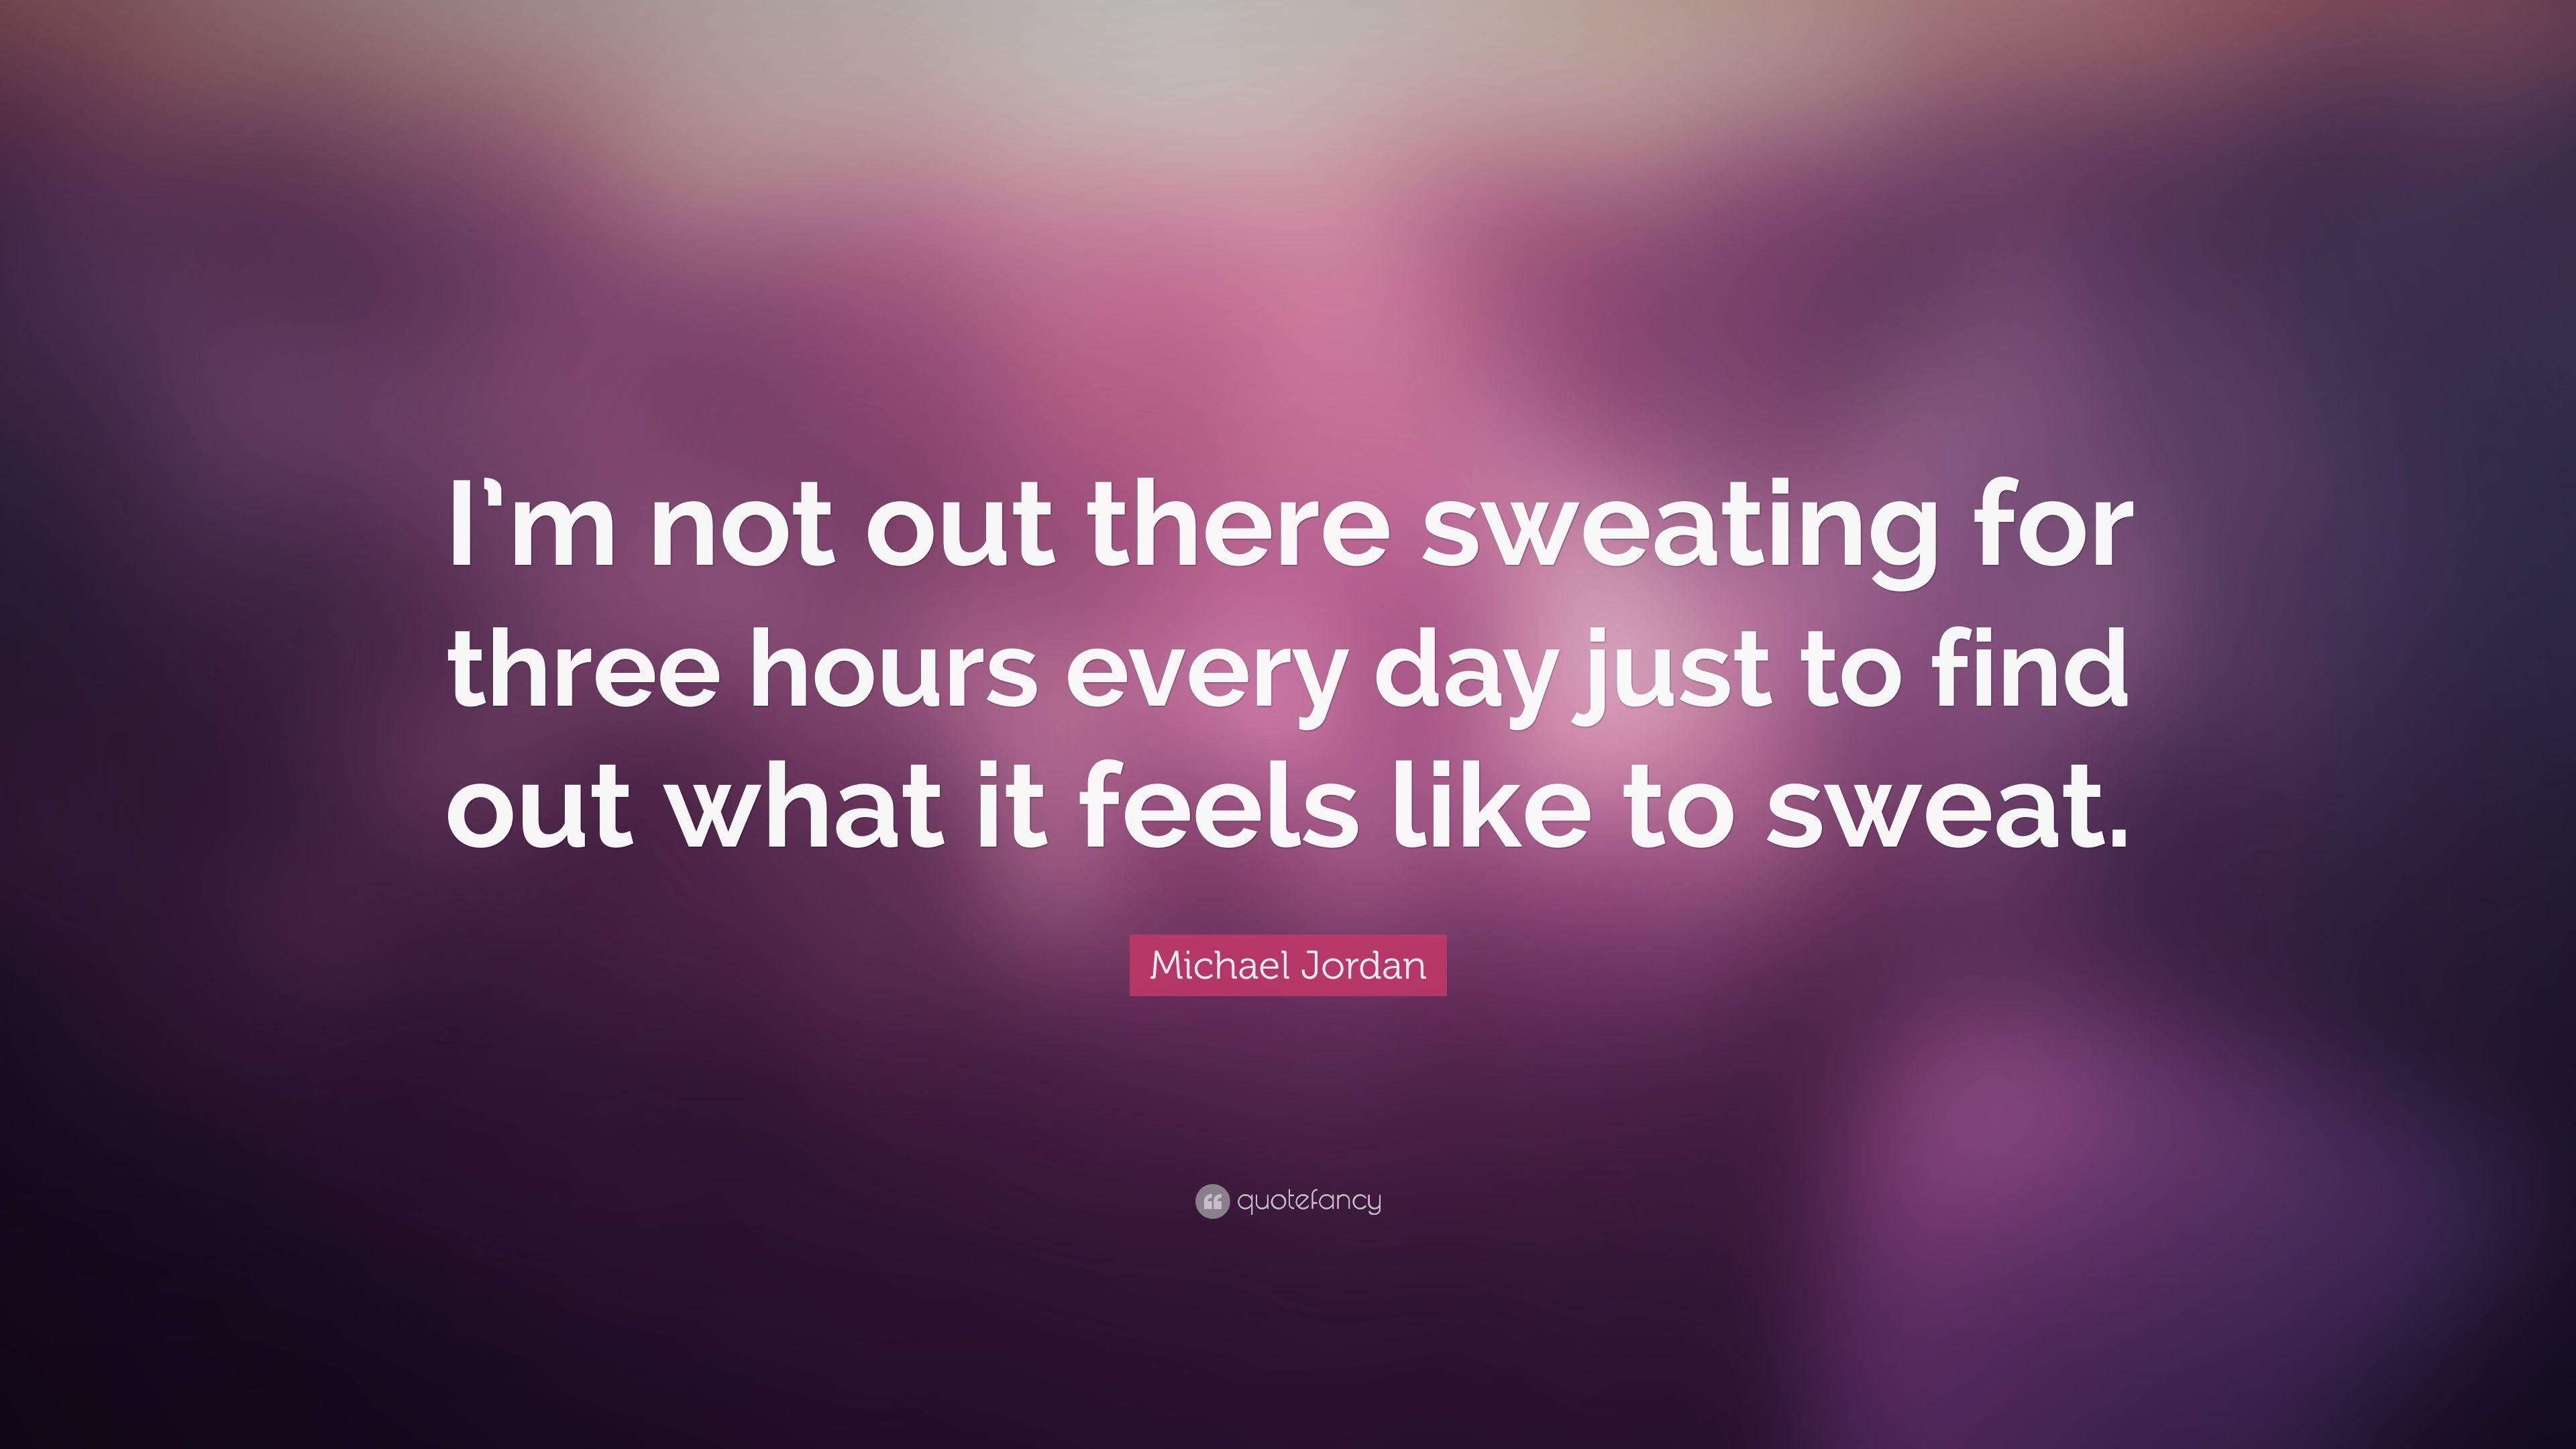 Michael Jordan Quote: “I'm not out there sweating for three hours